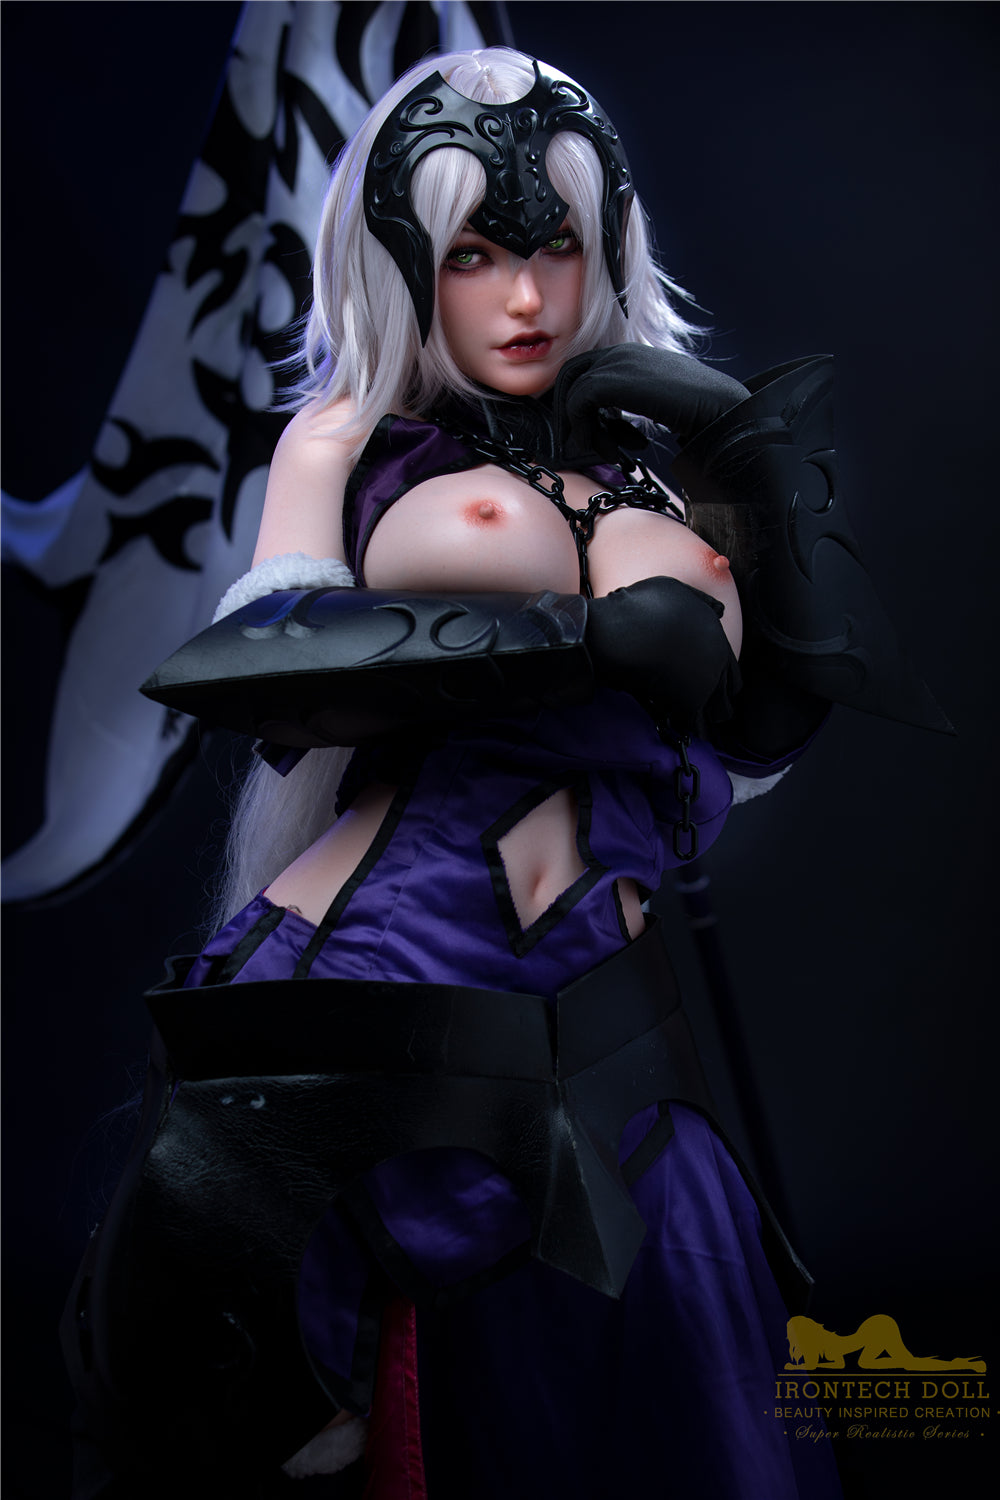 Irontech Doll 165 cm F Silicone - Eva Coser | Buy Sex Dolls at DOLLS ACTUALLY